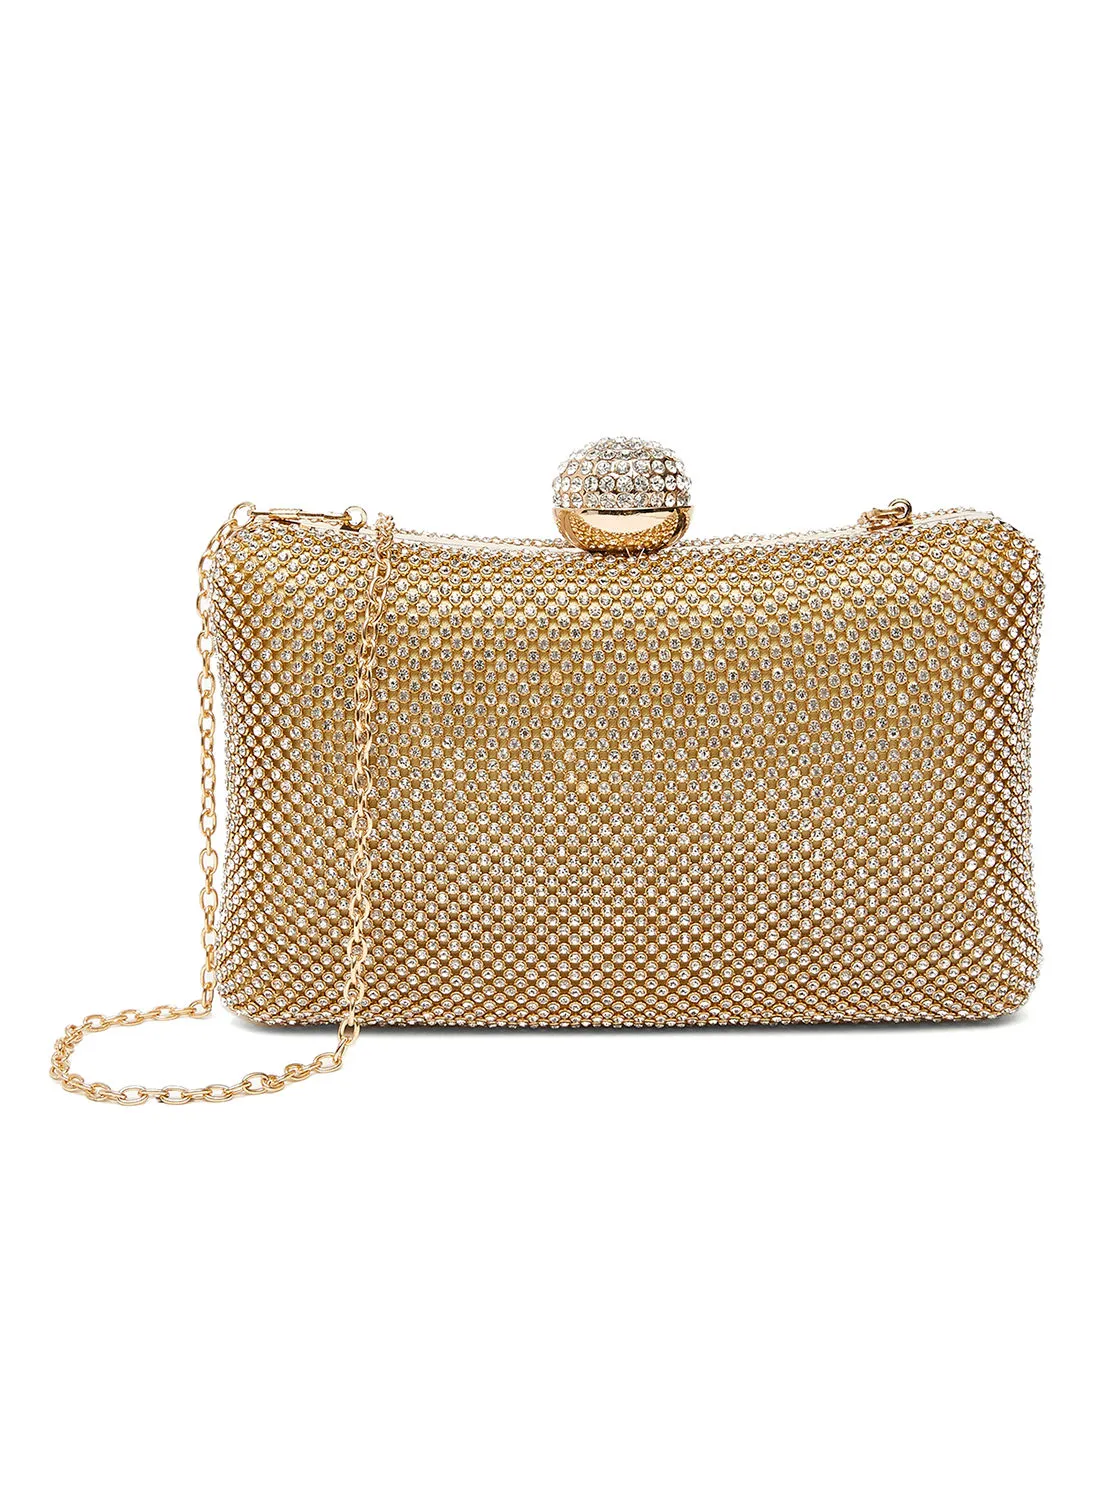 YUEJIN Faux Leather Clutch Gold